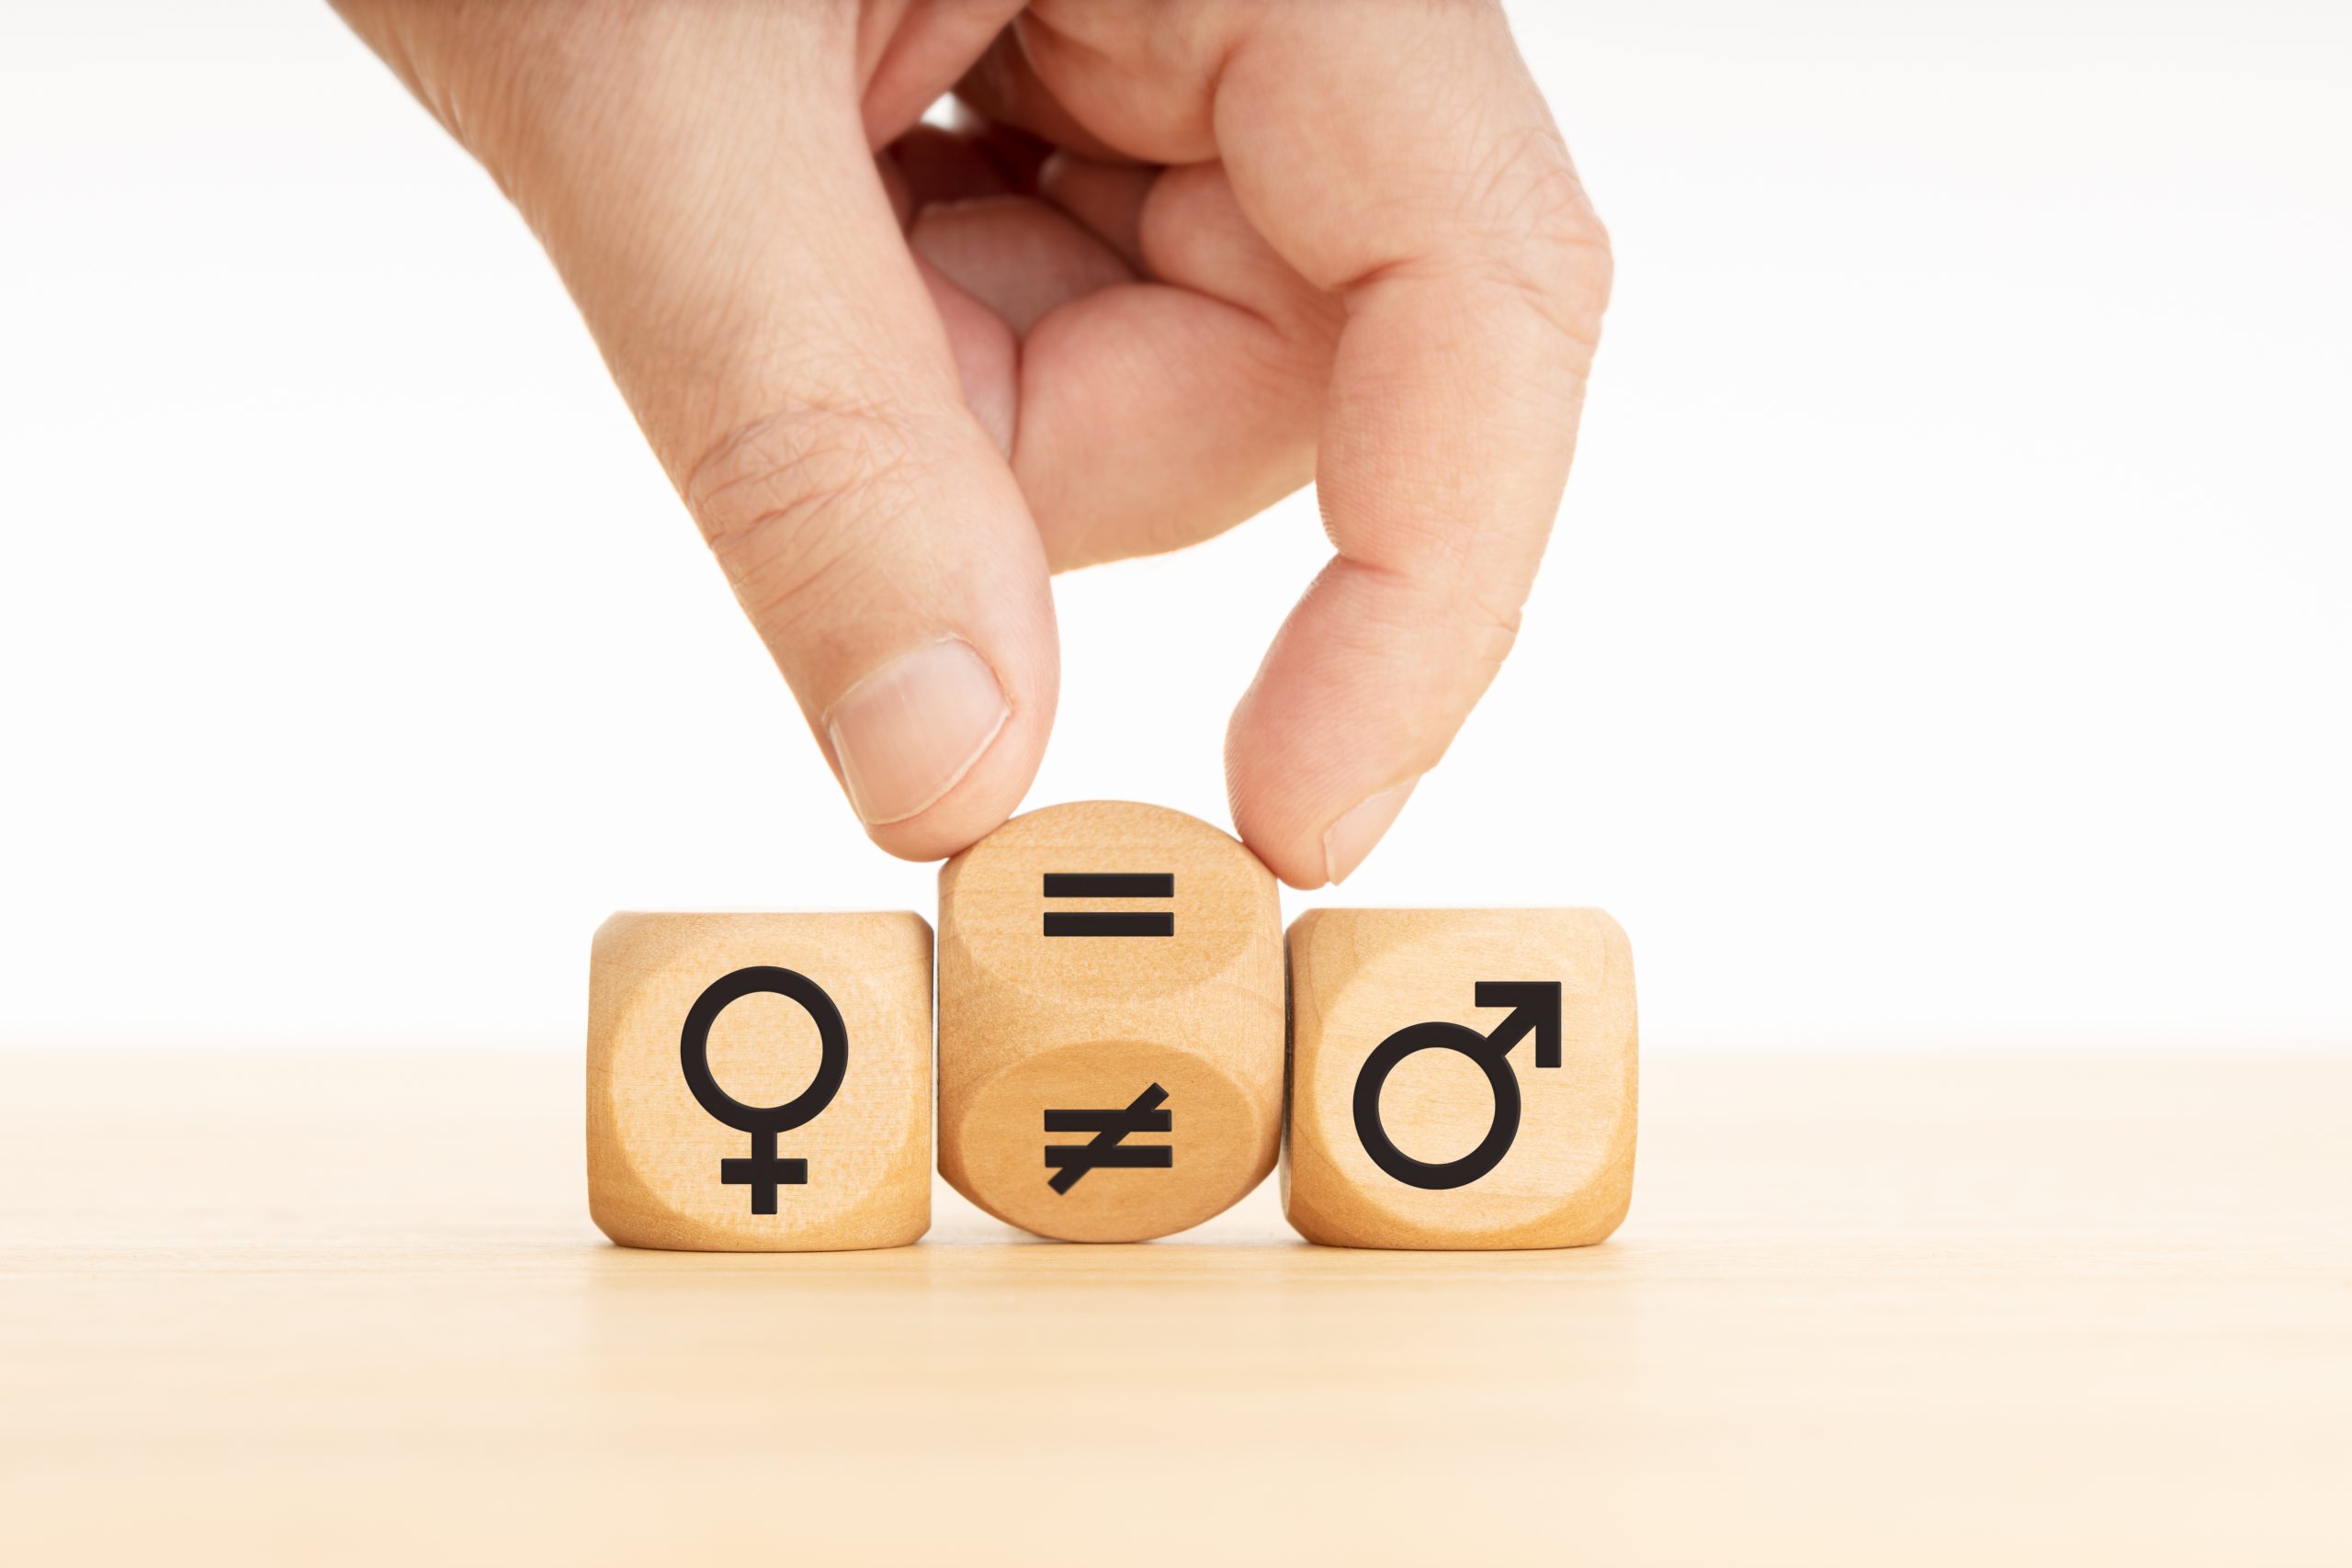 Gender equality concept. Hand turns a wooden block and changes a unequal sign to a equal sign between symbols of men and women